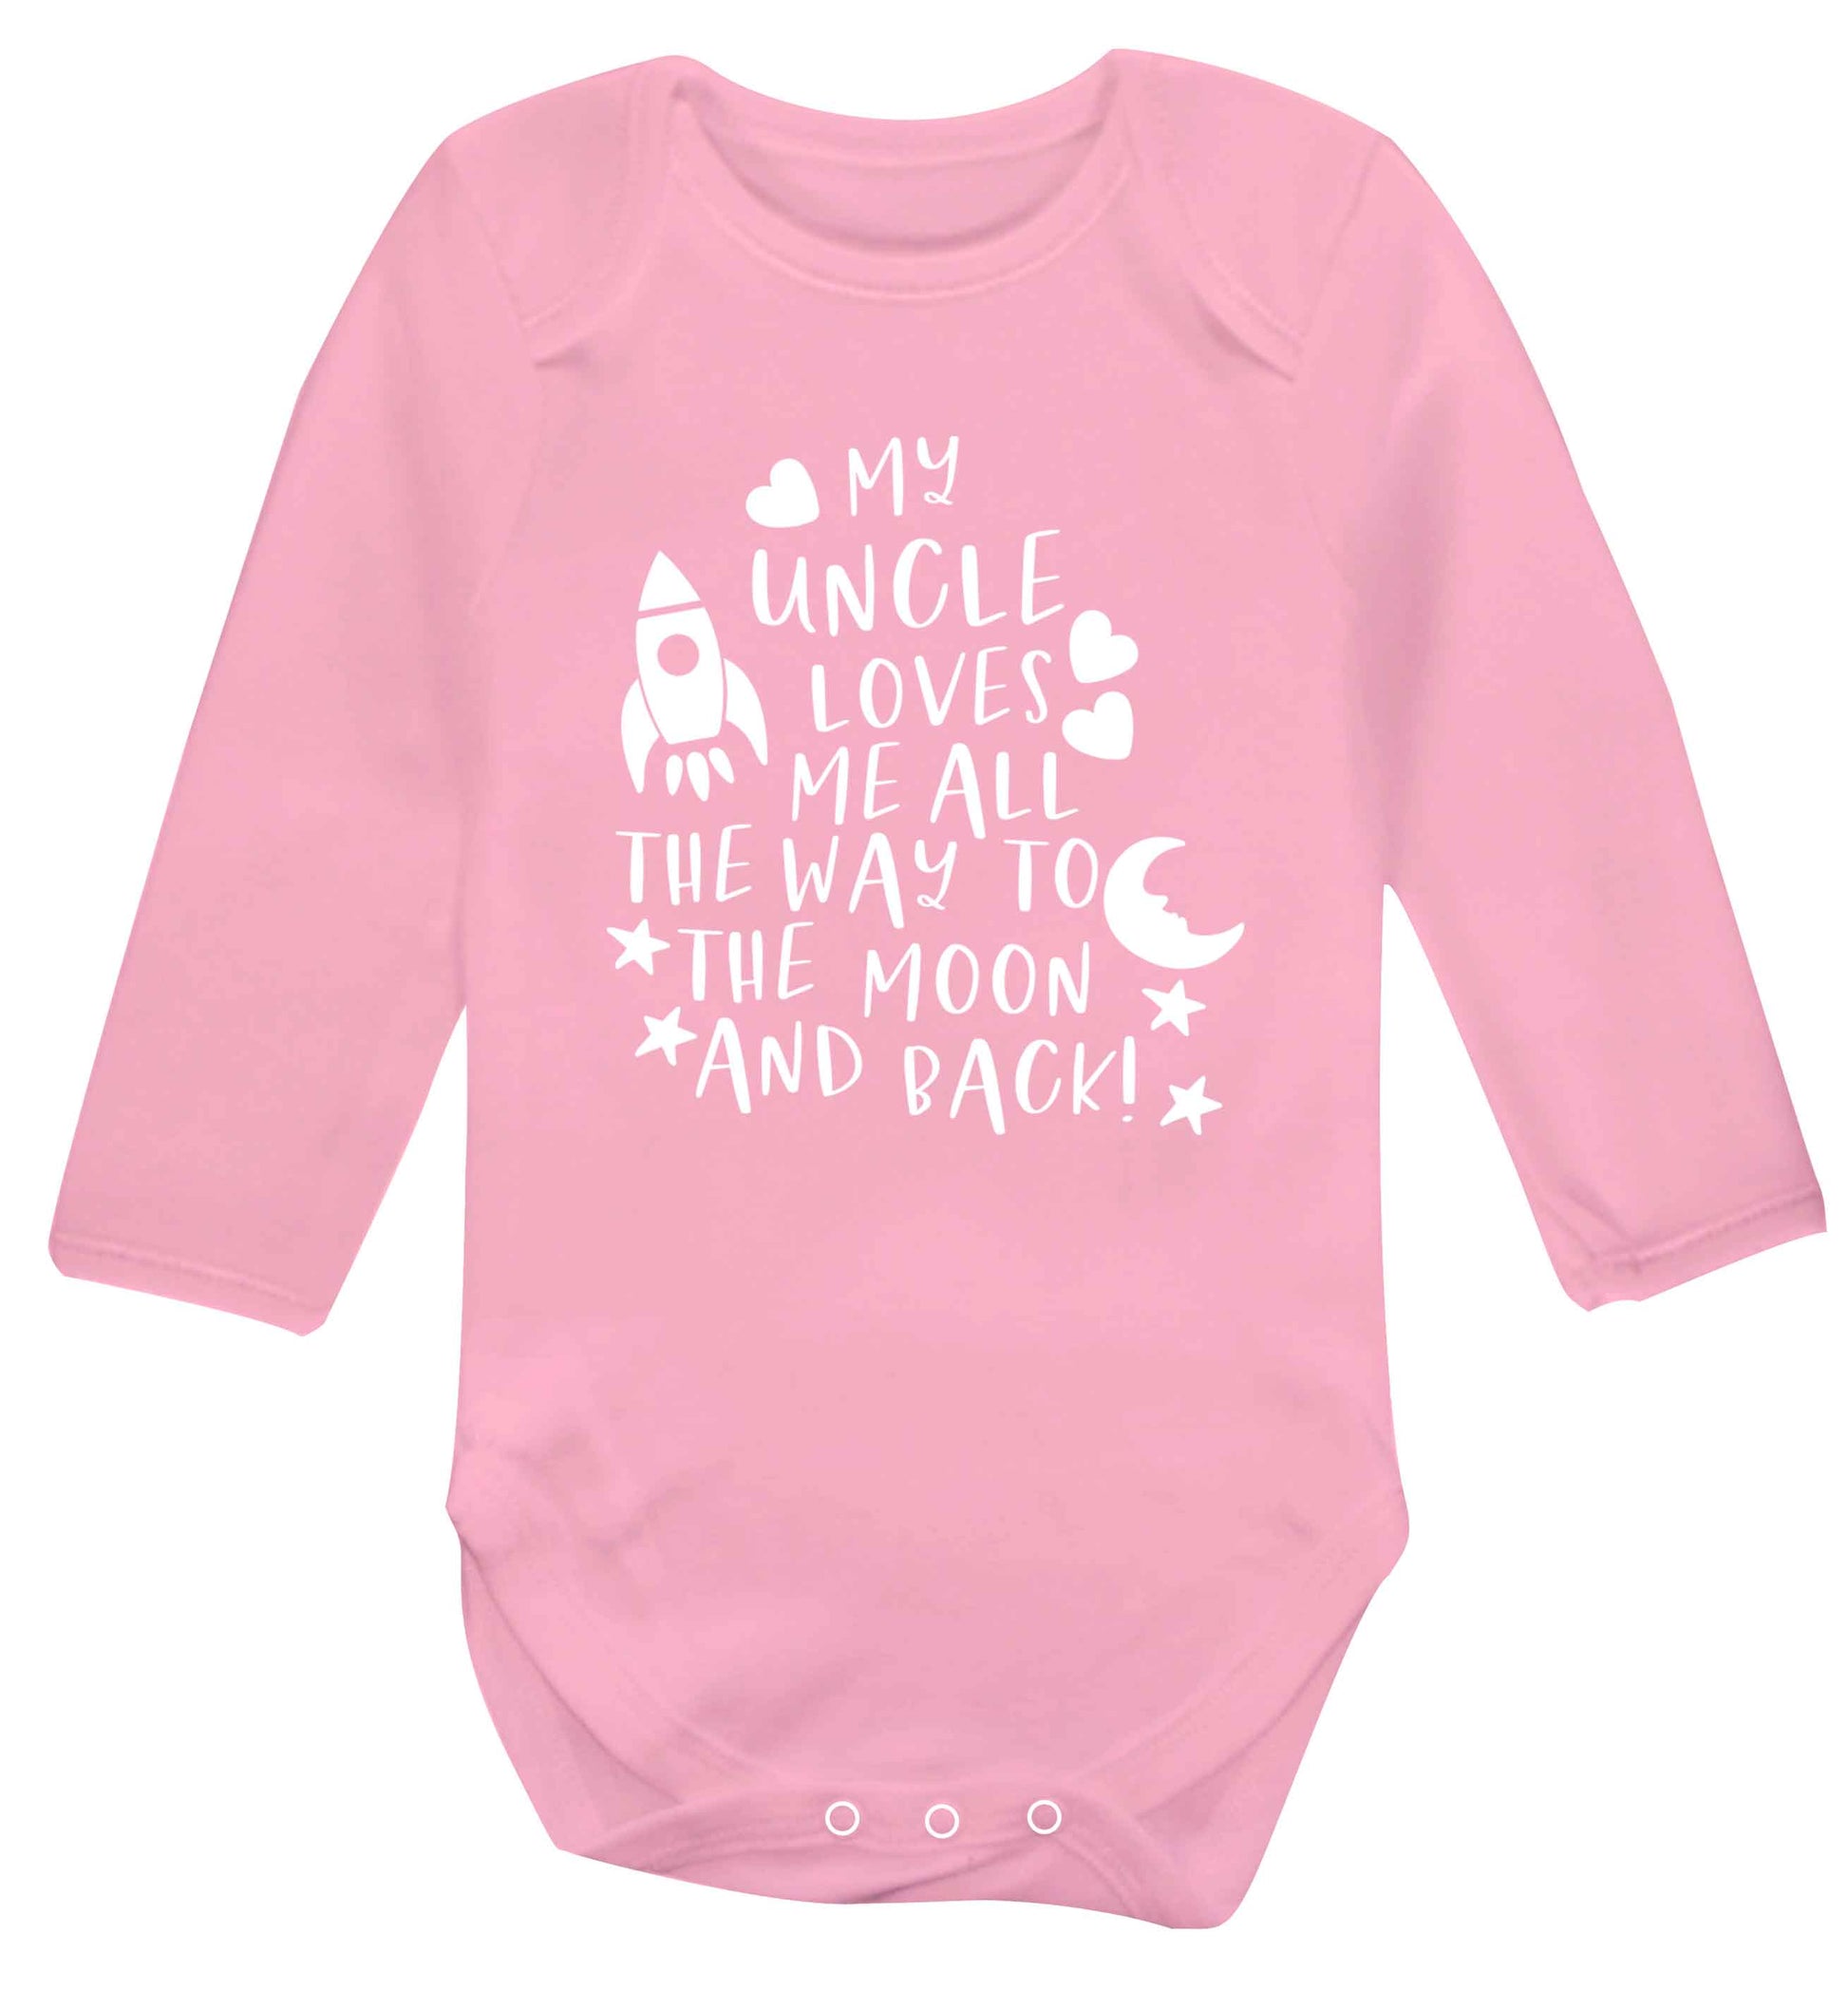 My uncle loves me all the way to the moon and back Baby Vest long sleeved pale pink 6-12 months